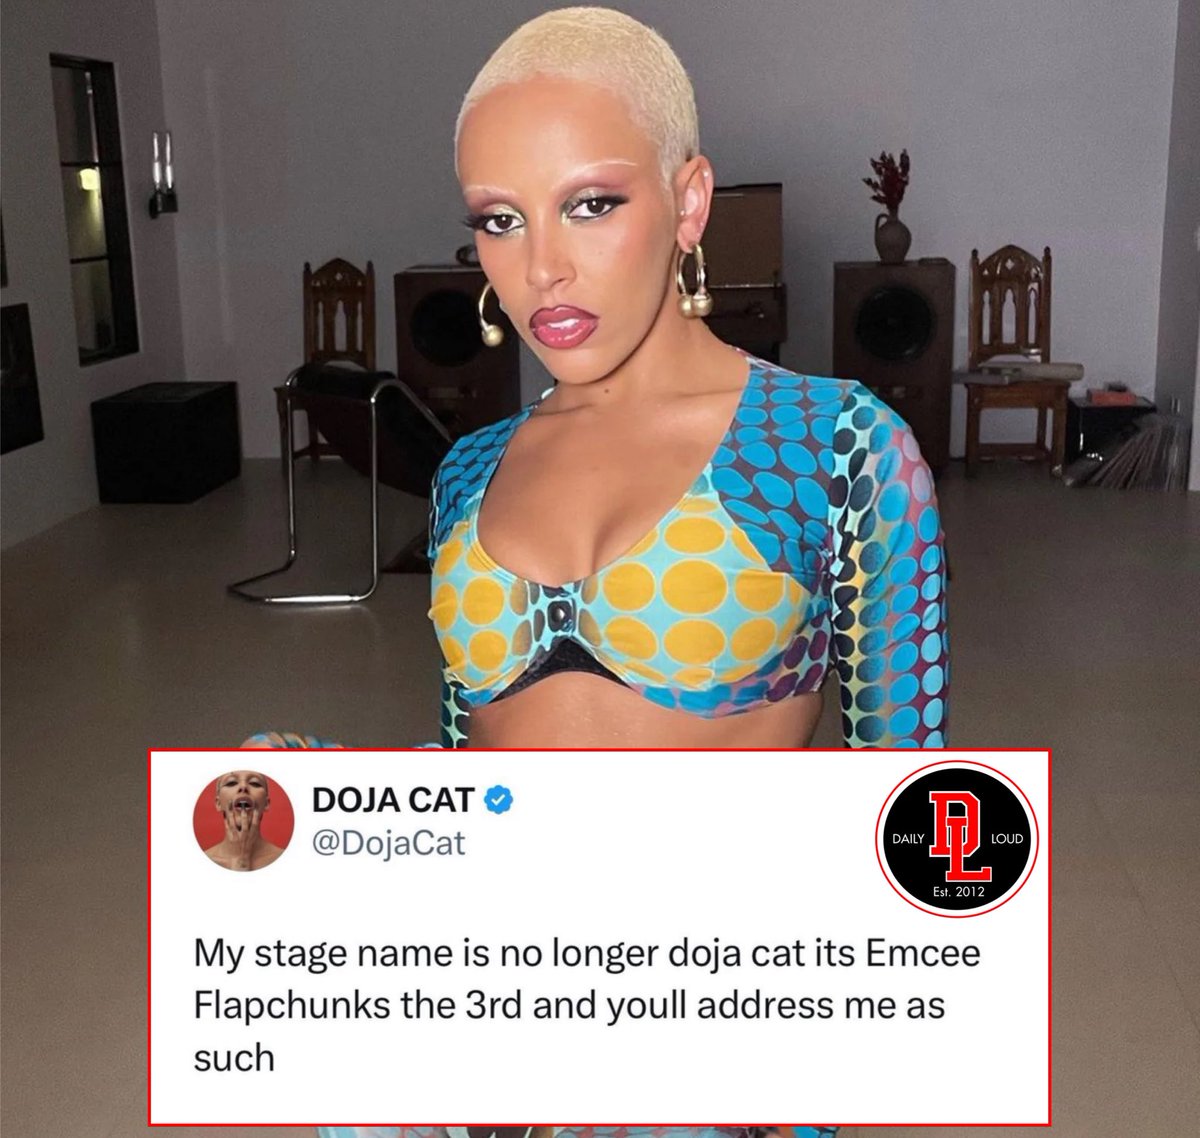 Doja Cat reveals the she has changed her stage name to “Emcee Flapchunks The 3rd”